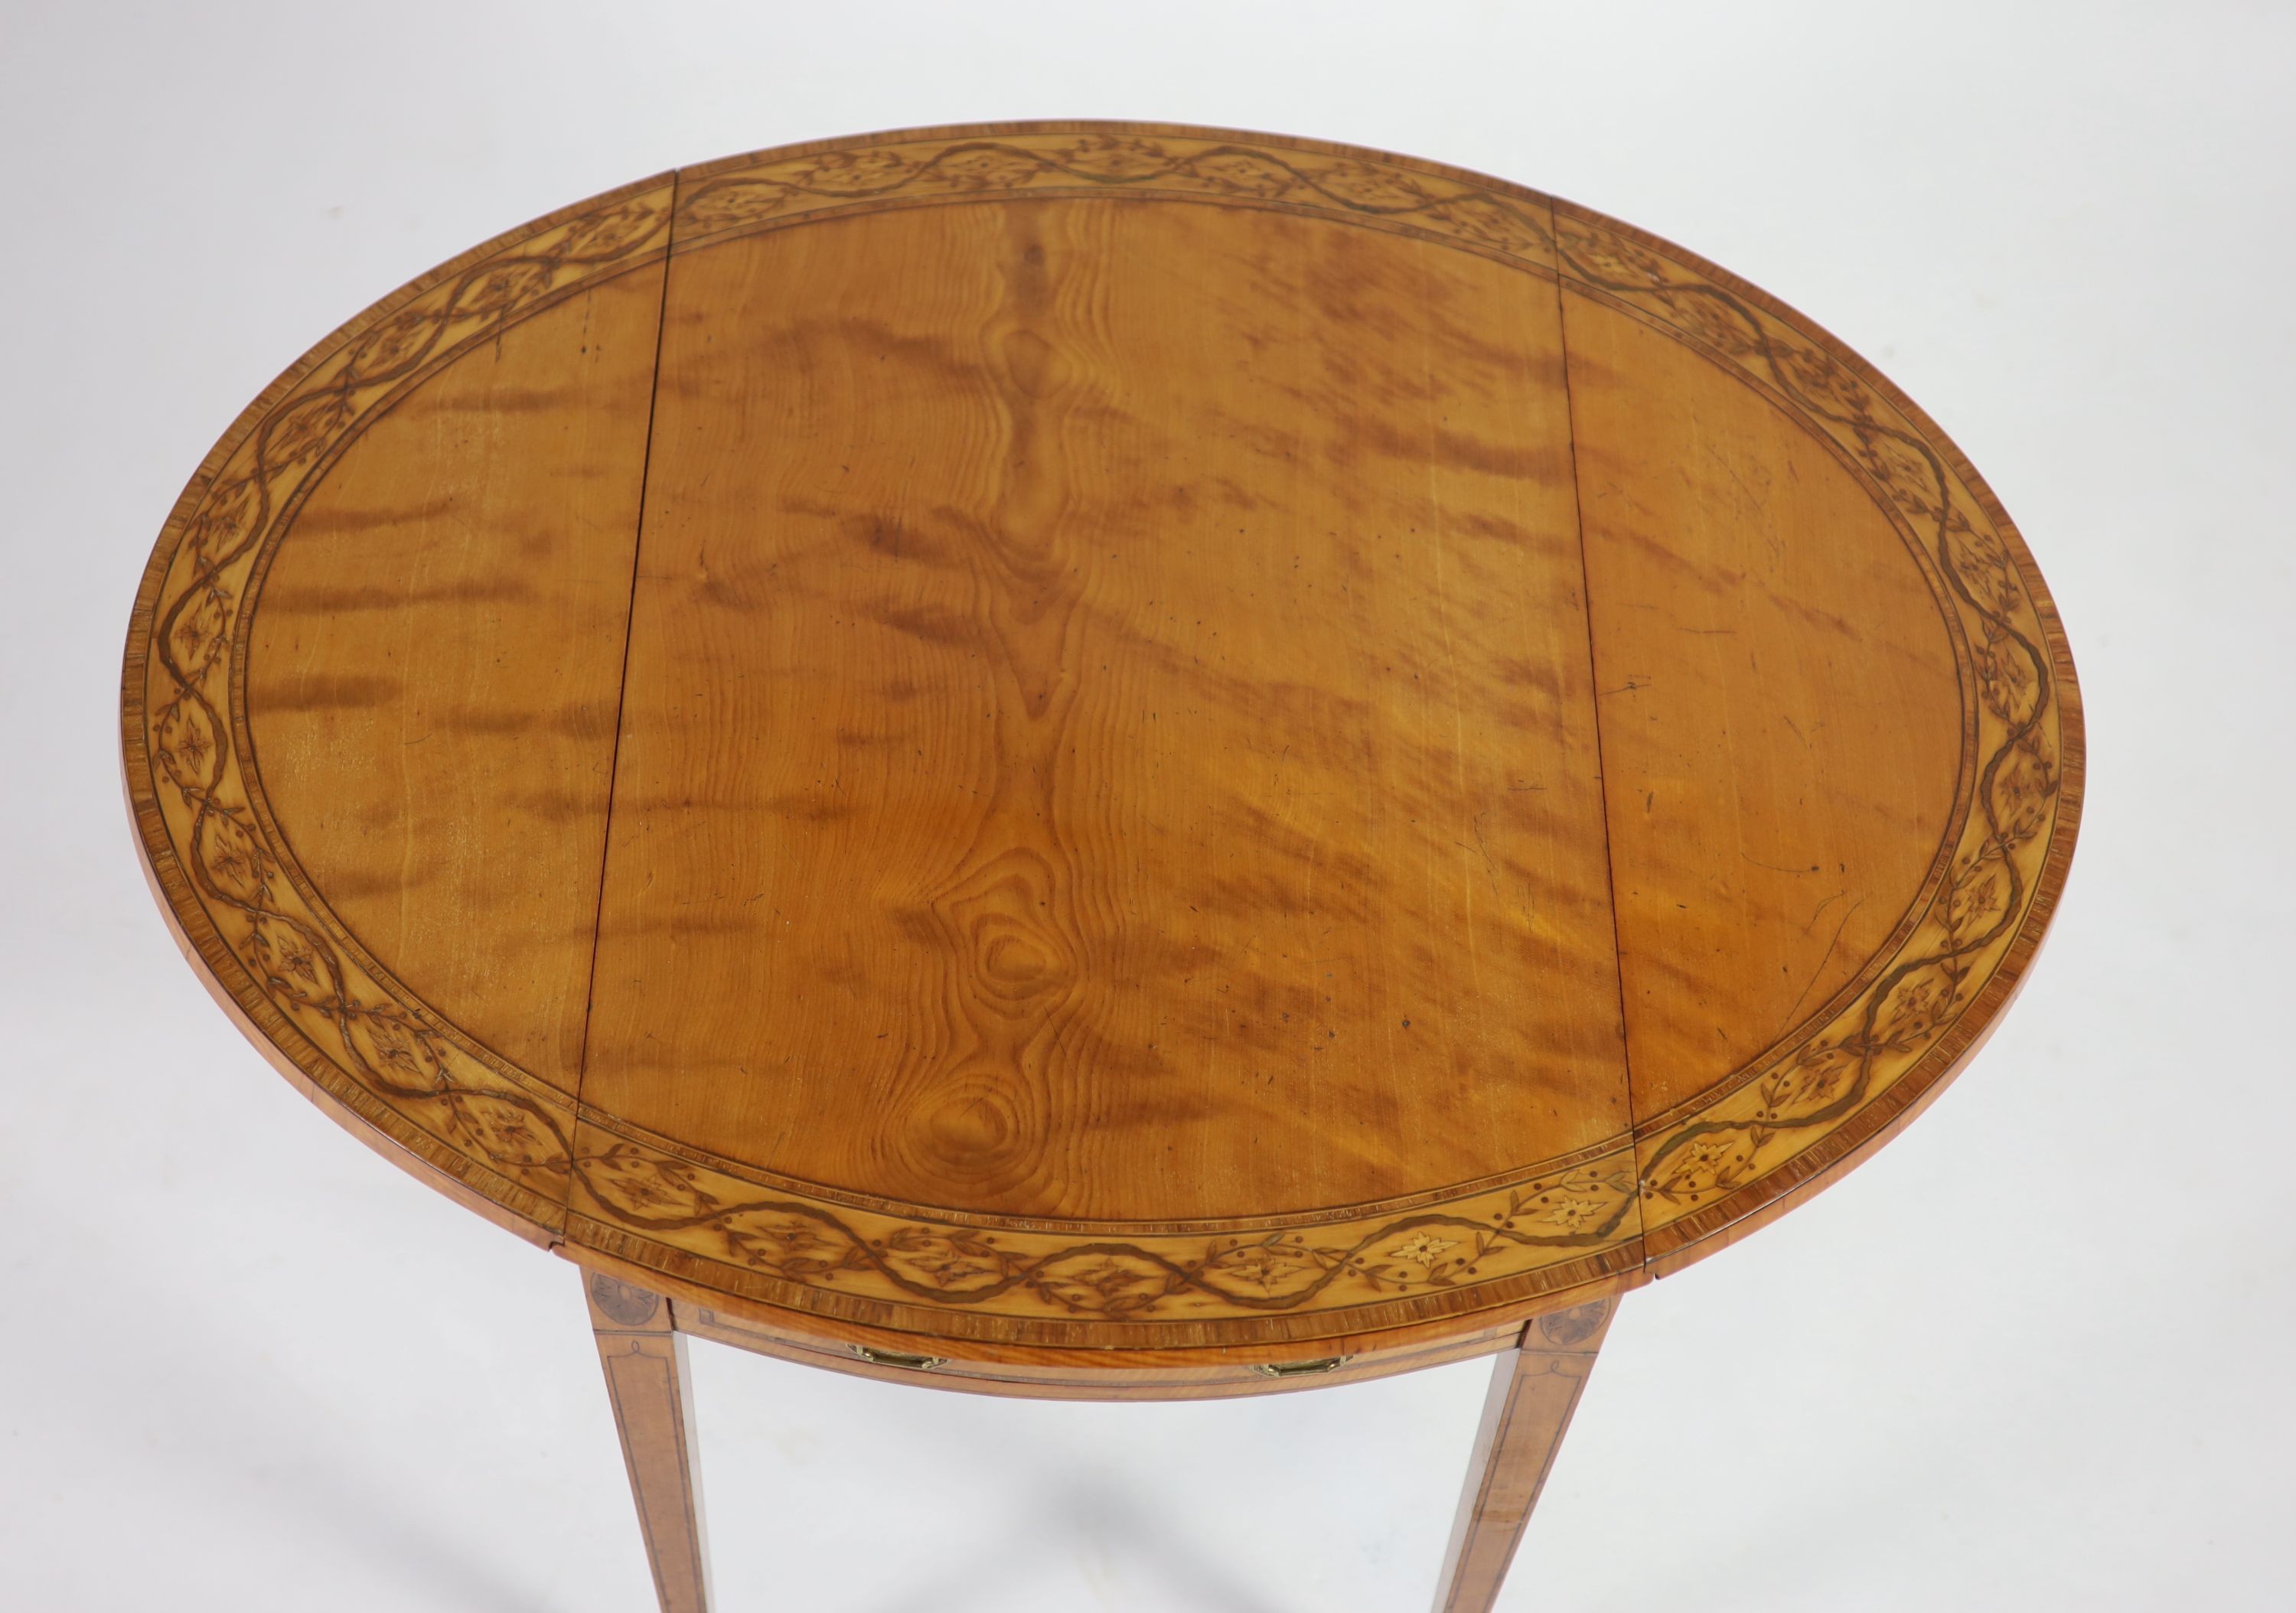 A George III Sheraton style marquetry inlaid satinwood Pembroke table,the oval top with rosewood and - Image 4 of 4